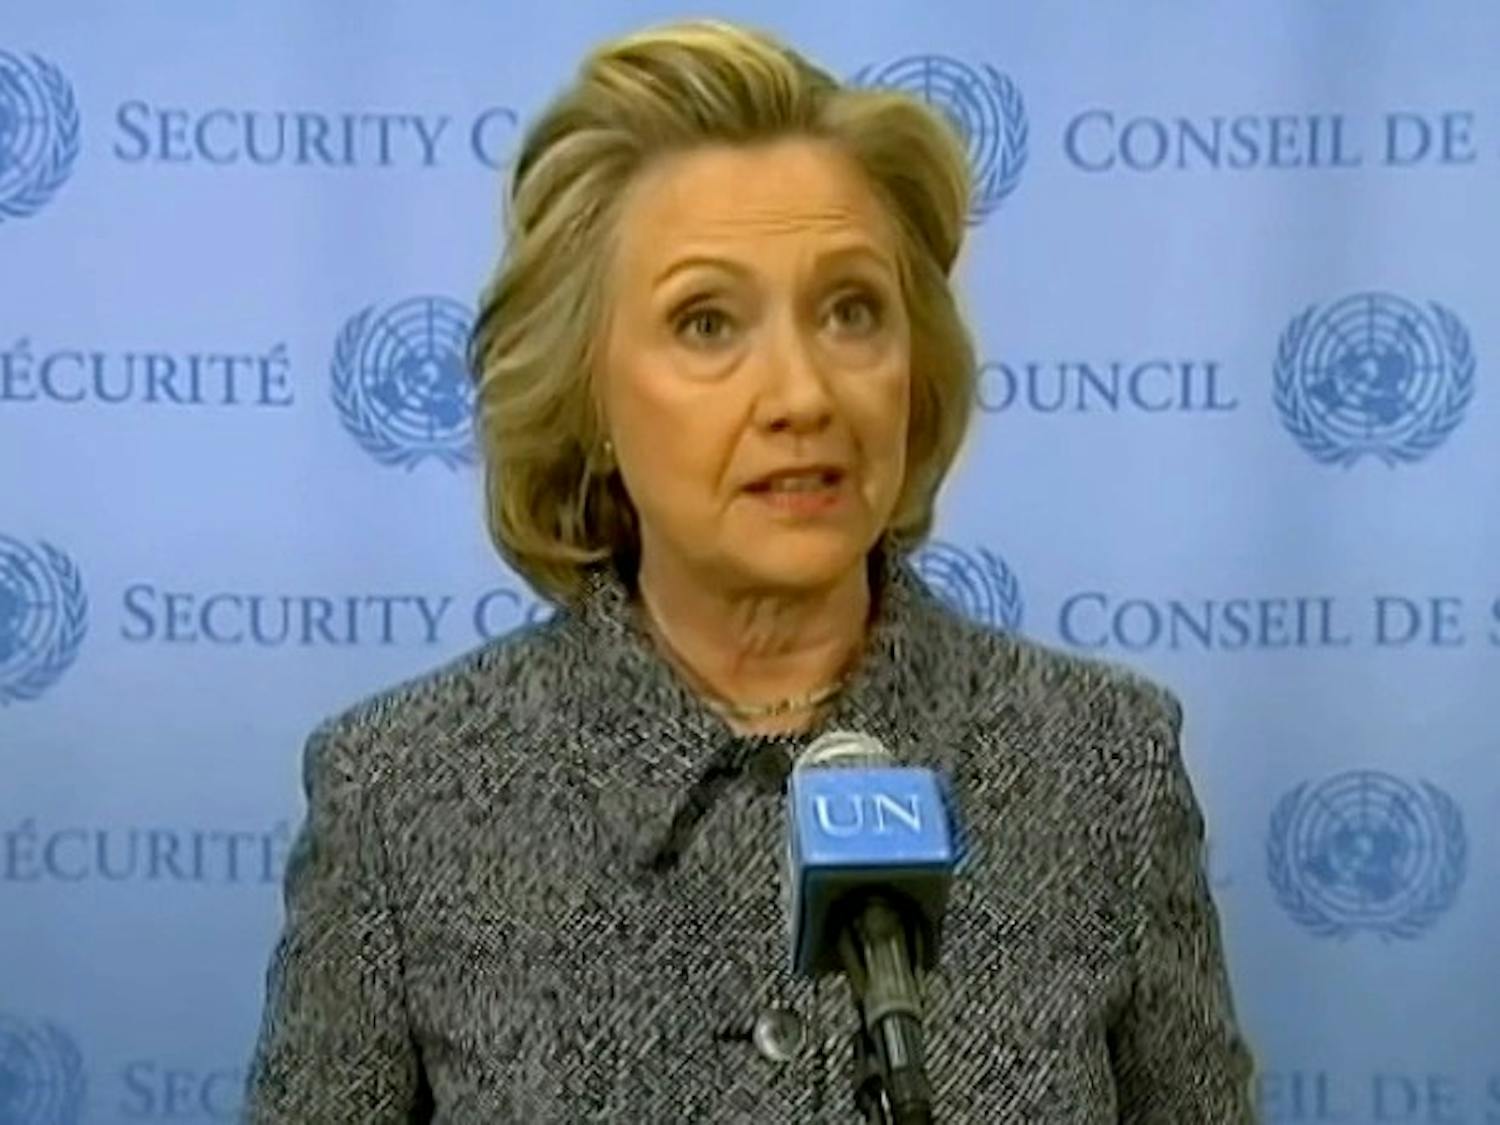 Clinton comments on email controversy